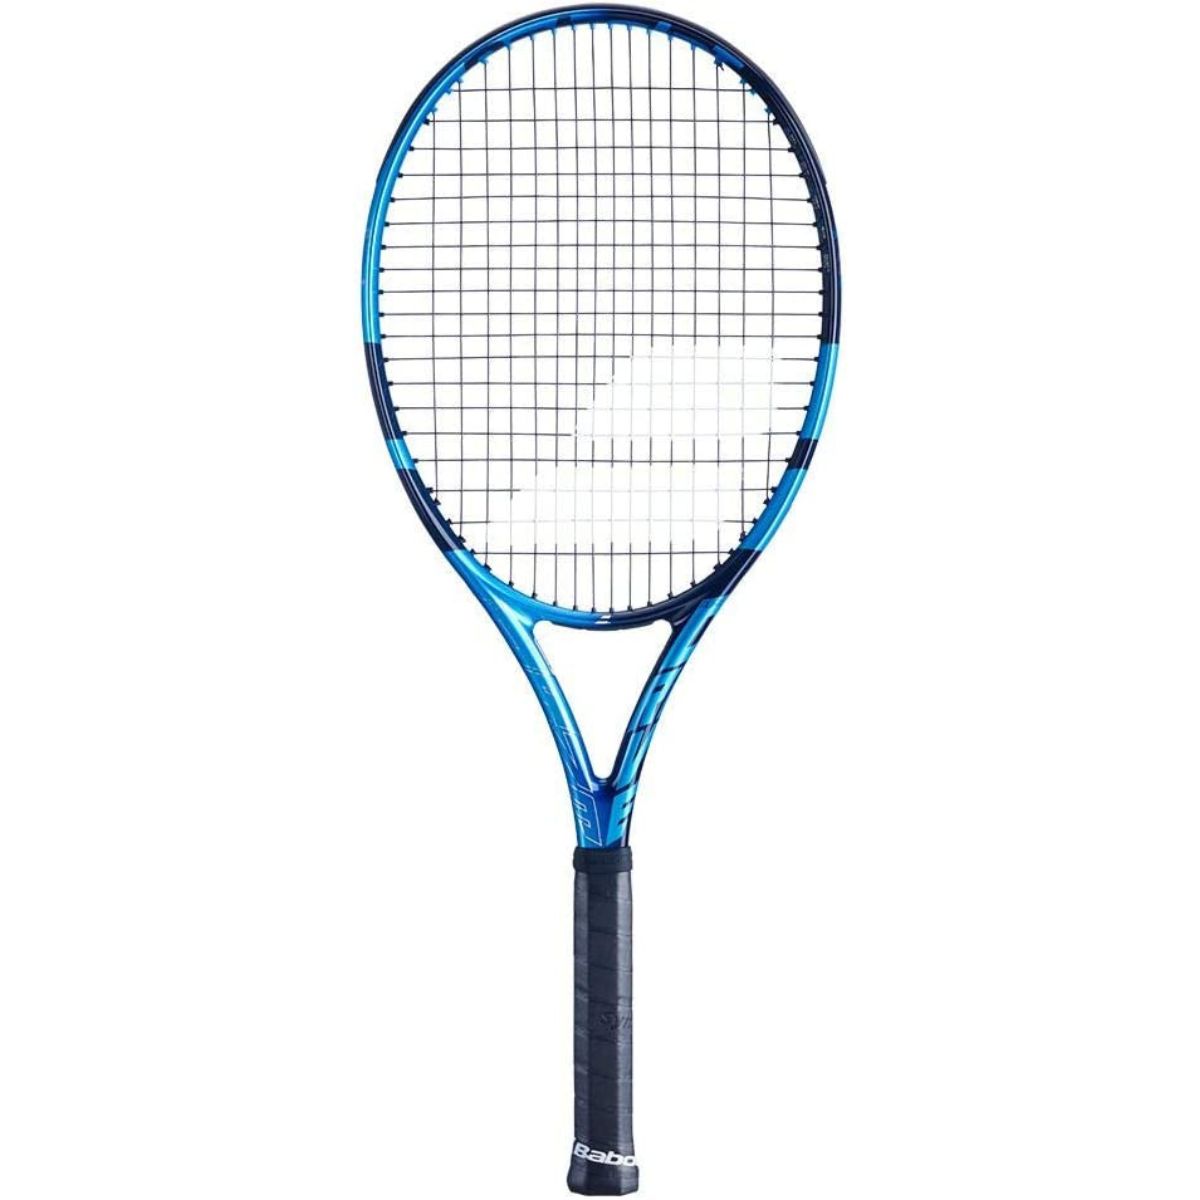 Babolat Pure Drive Tennis Racket Review